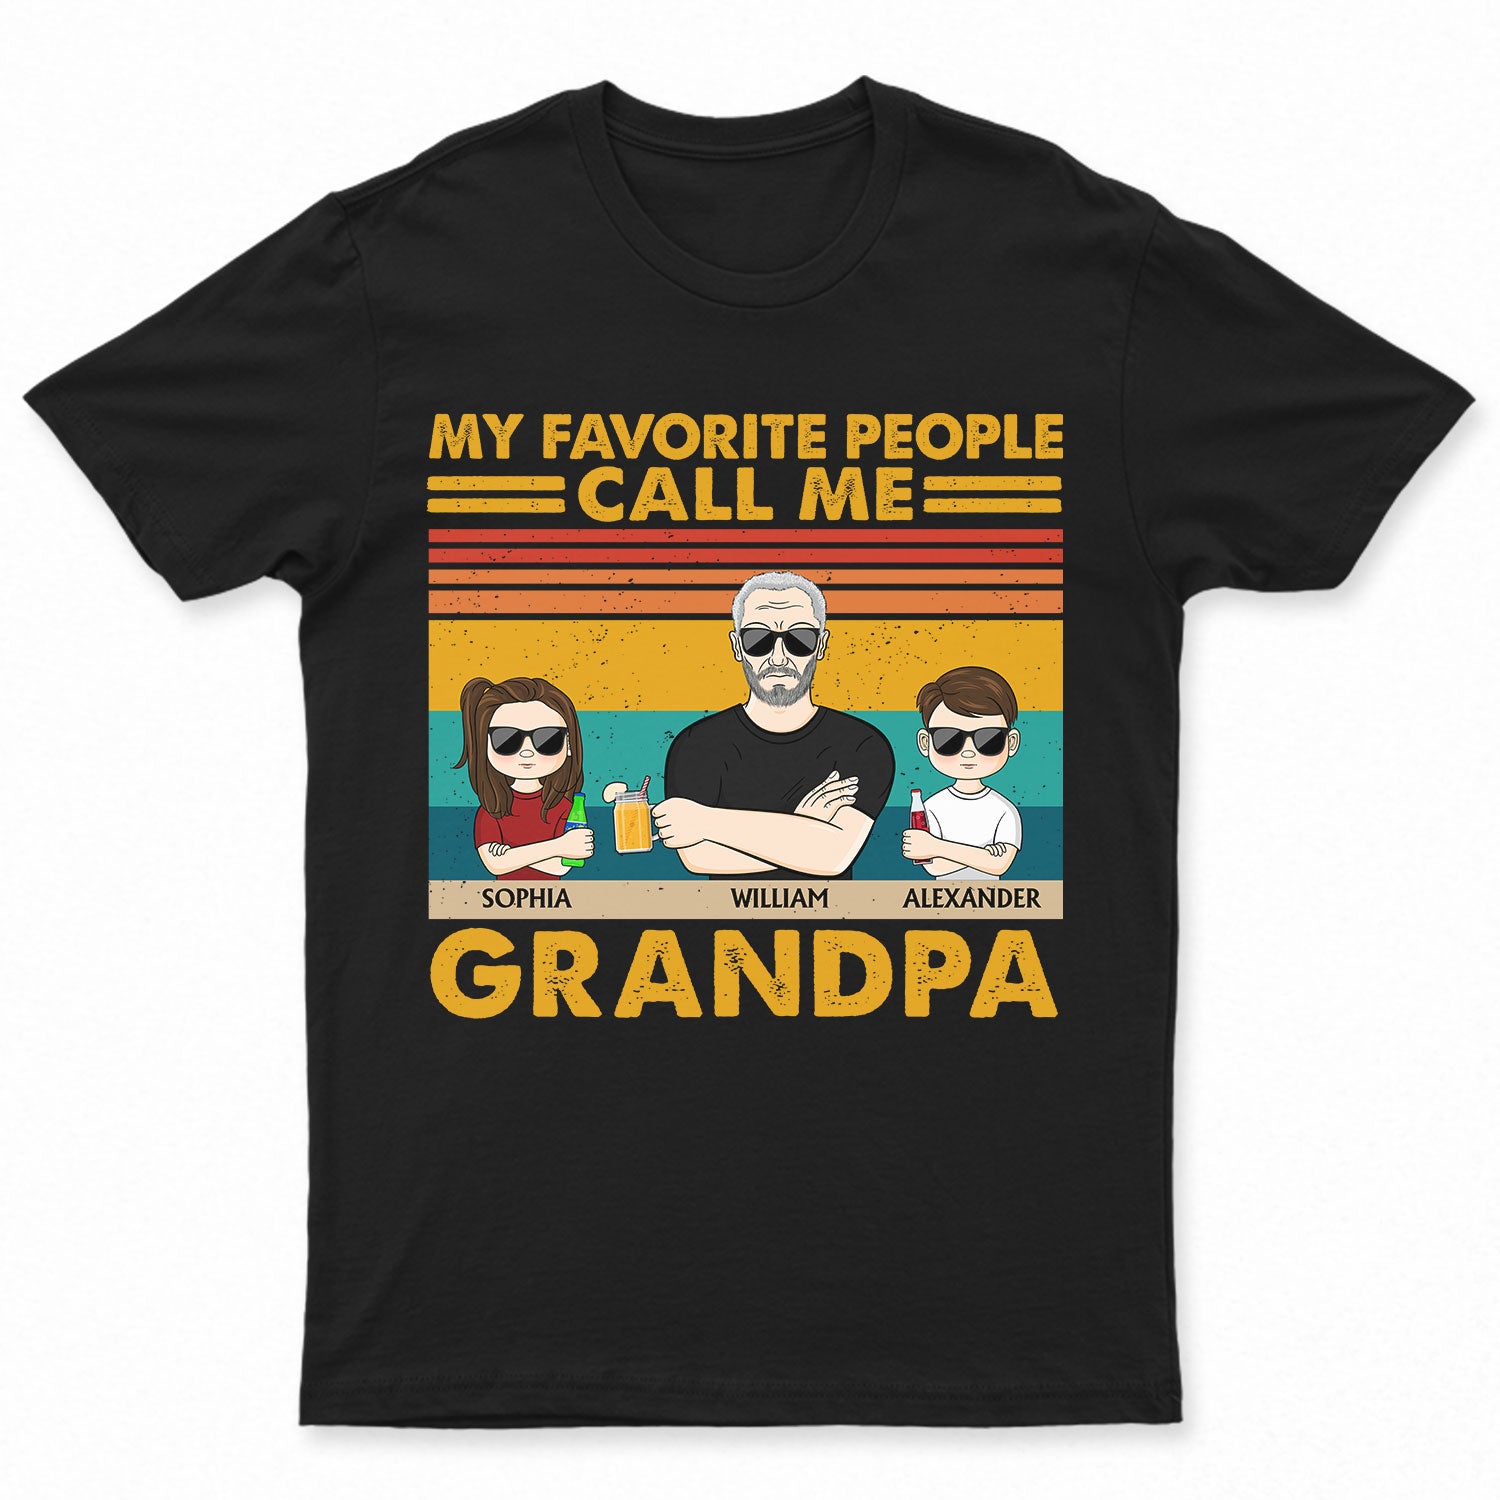 My Favorite People Call Me Grandpa Grandparents Grandkids - Funny, Birthday, Family Gift For Grandfather, Husband - Personalized Custom T Shirt